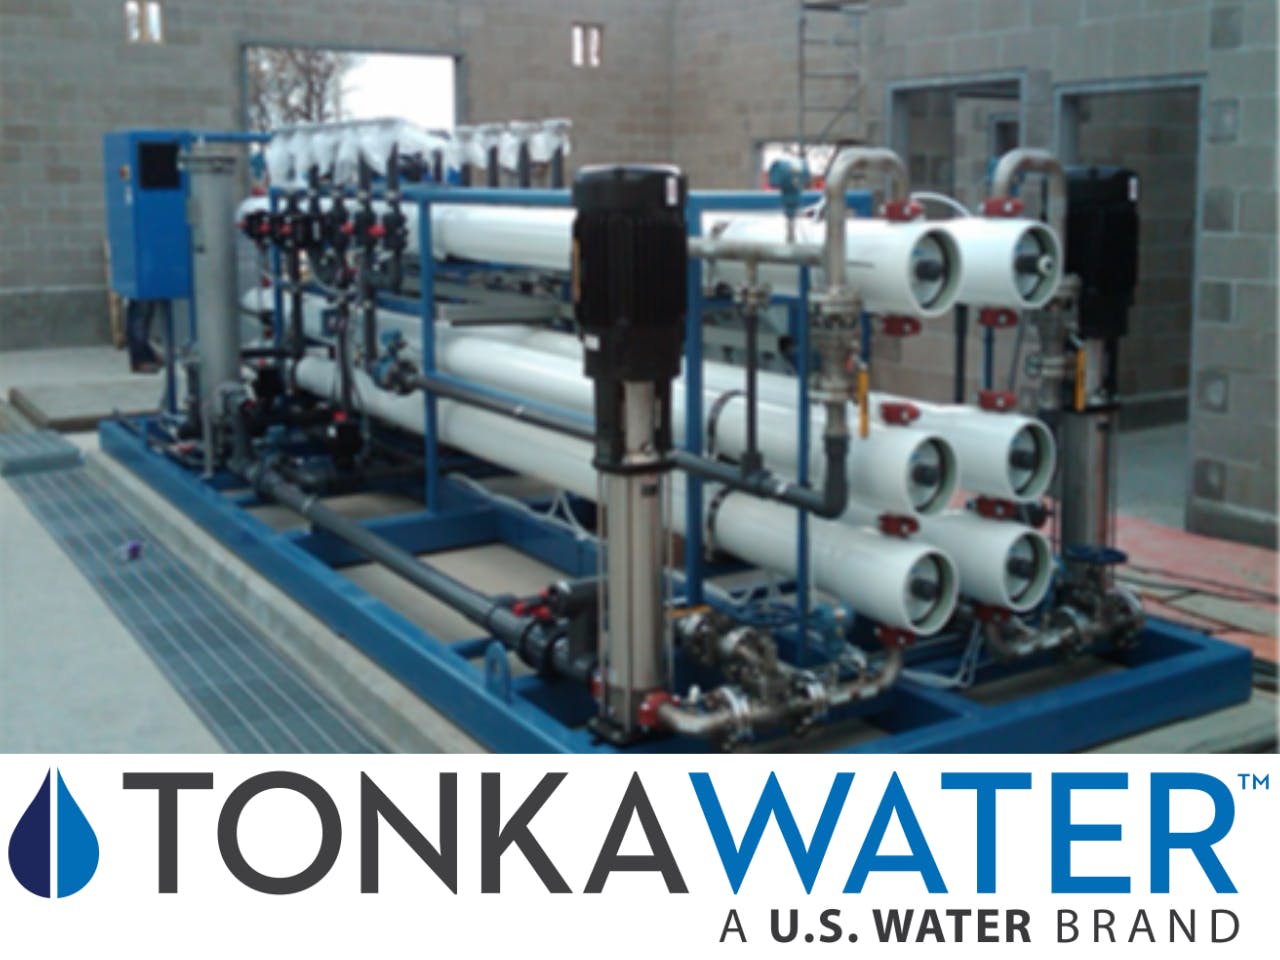 Water Treatment Services, in parternship with Tonka Water